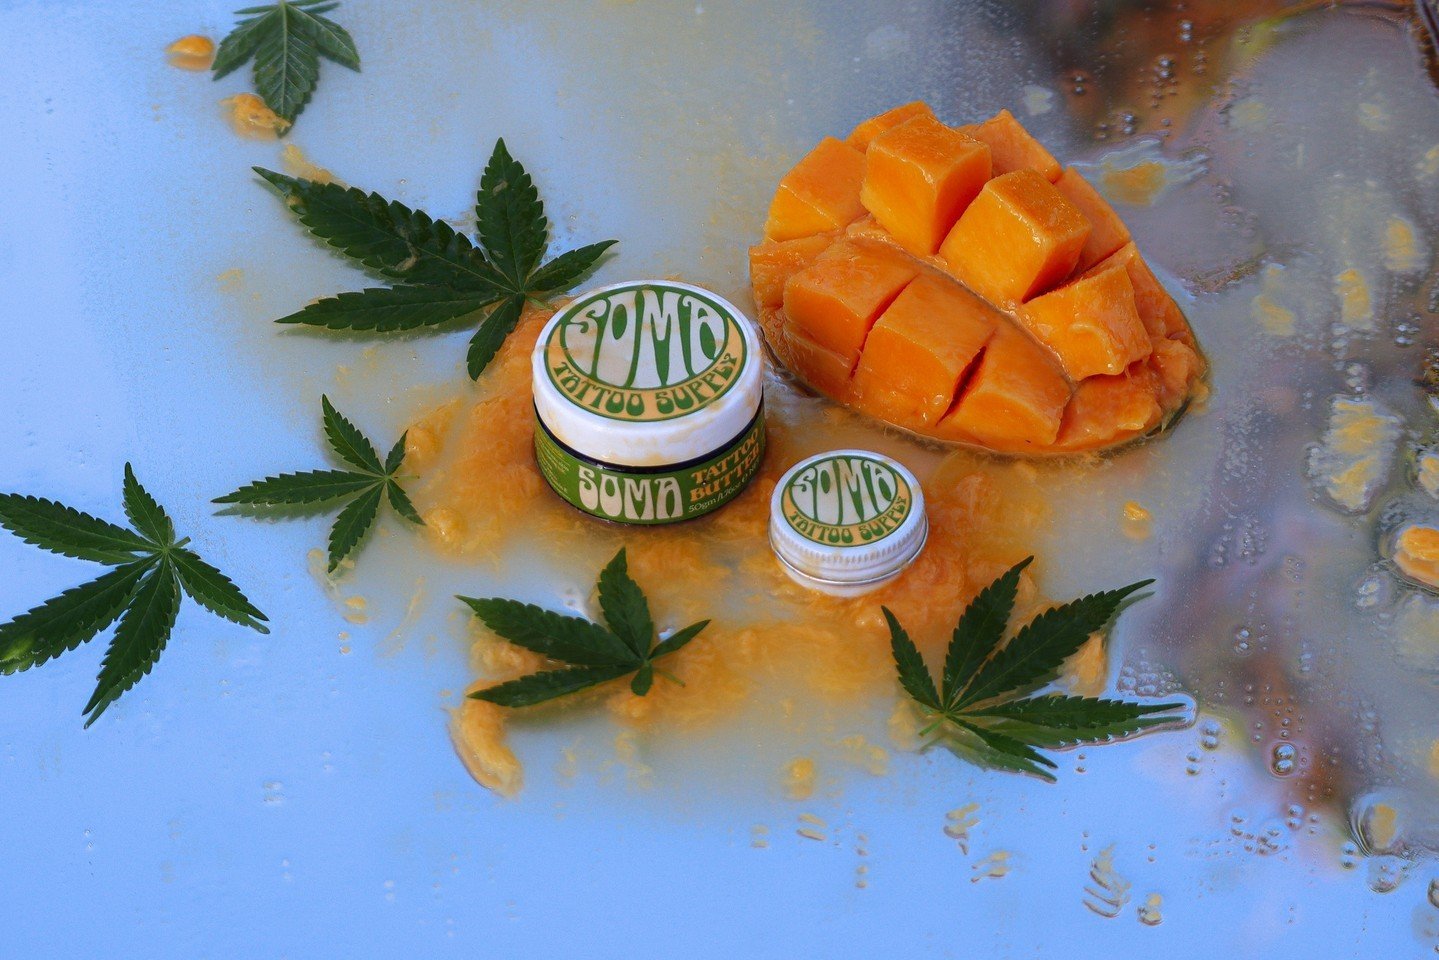 Organic Tattoo Butter! Smooth mango butter infused with hemp!⁠
⁠
Click SHOP NOW to grab some for yourself! @onetreeplanted each order!⁠
⁠
Made with Love by tattoo artists on Gubbi Gubbi Land / Sunshine Coast.⁠
⁠
Photo: @stacey_nightingale⁠
⁠
#handmad